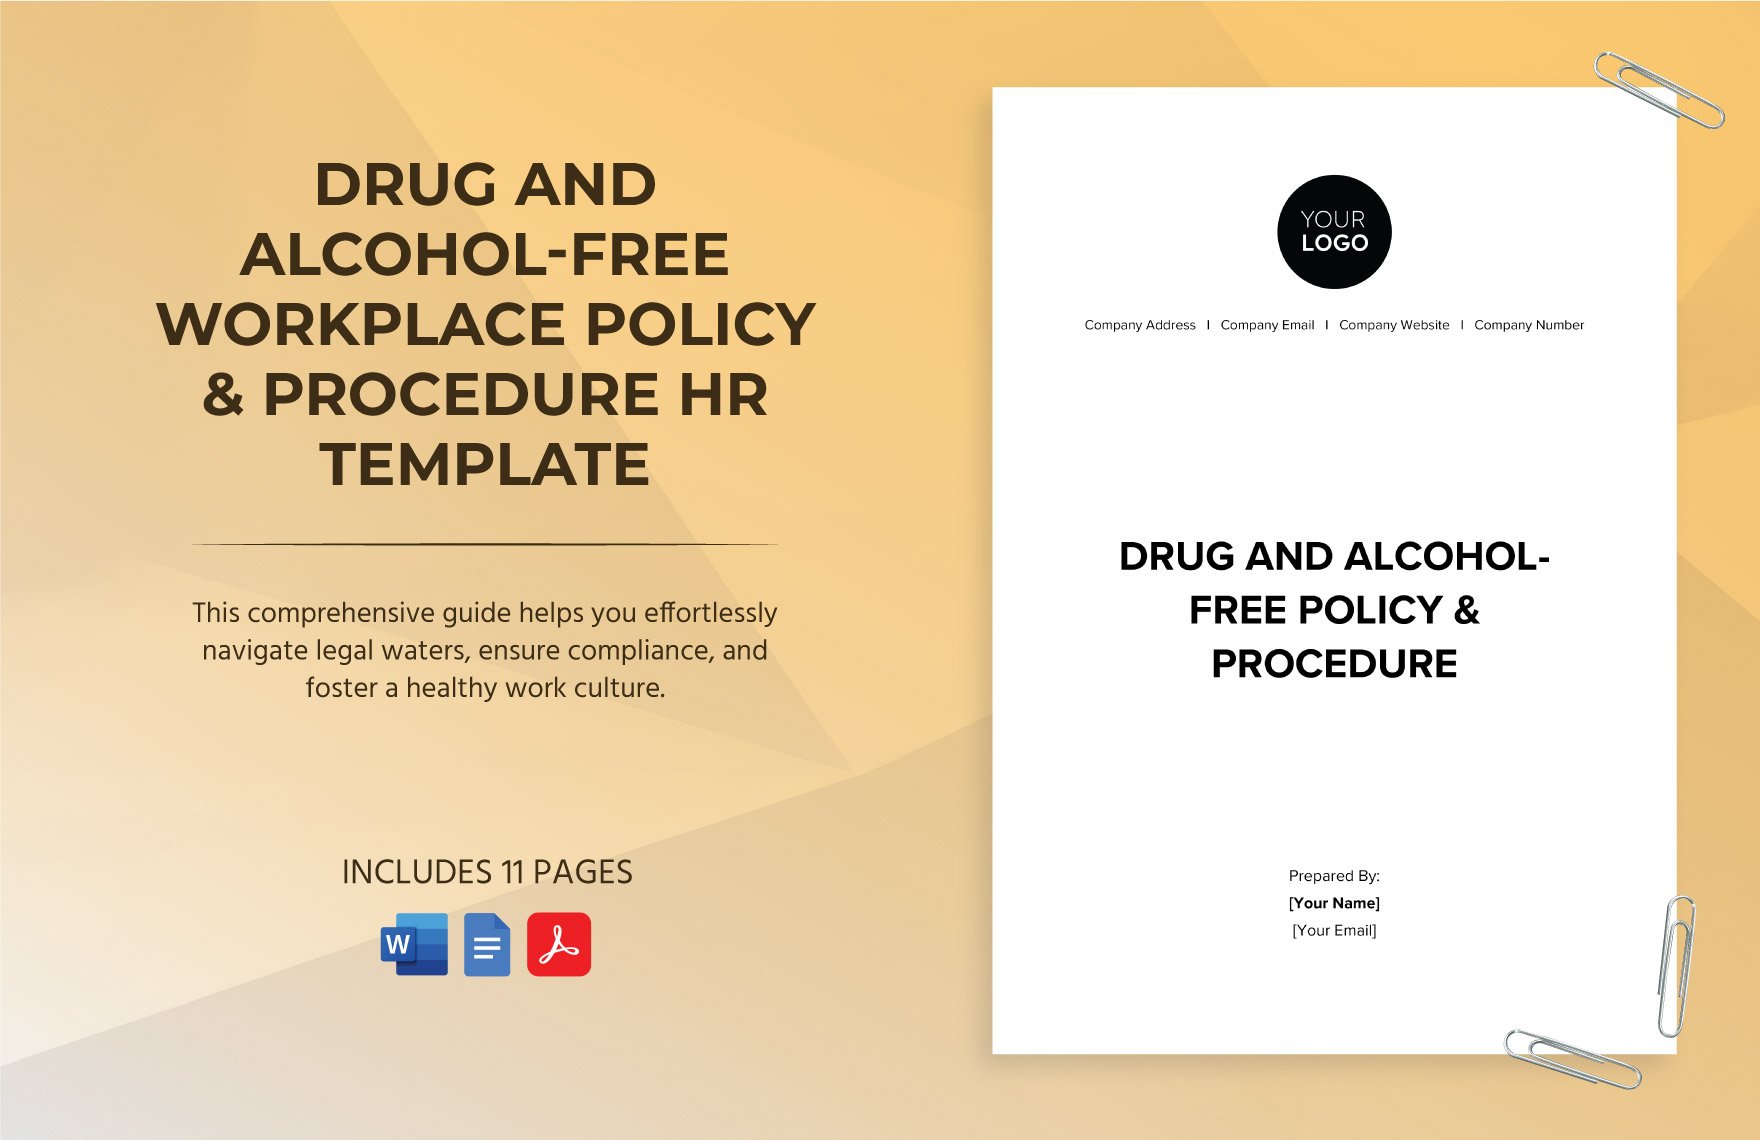 Drug and Alcohol-Free Workplace Policy & Procedure HR Template in Word, Google Docs, PDF